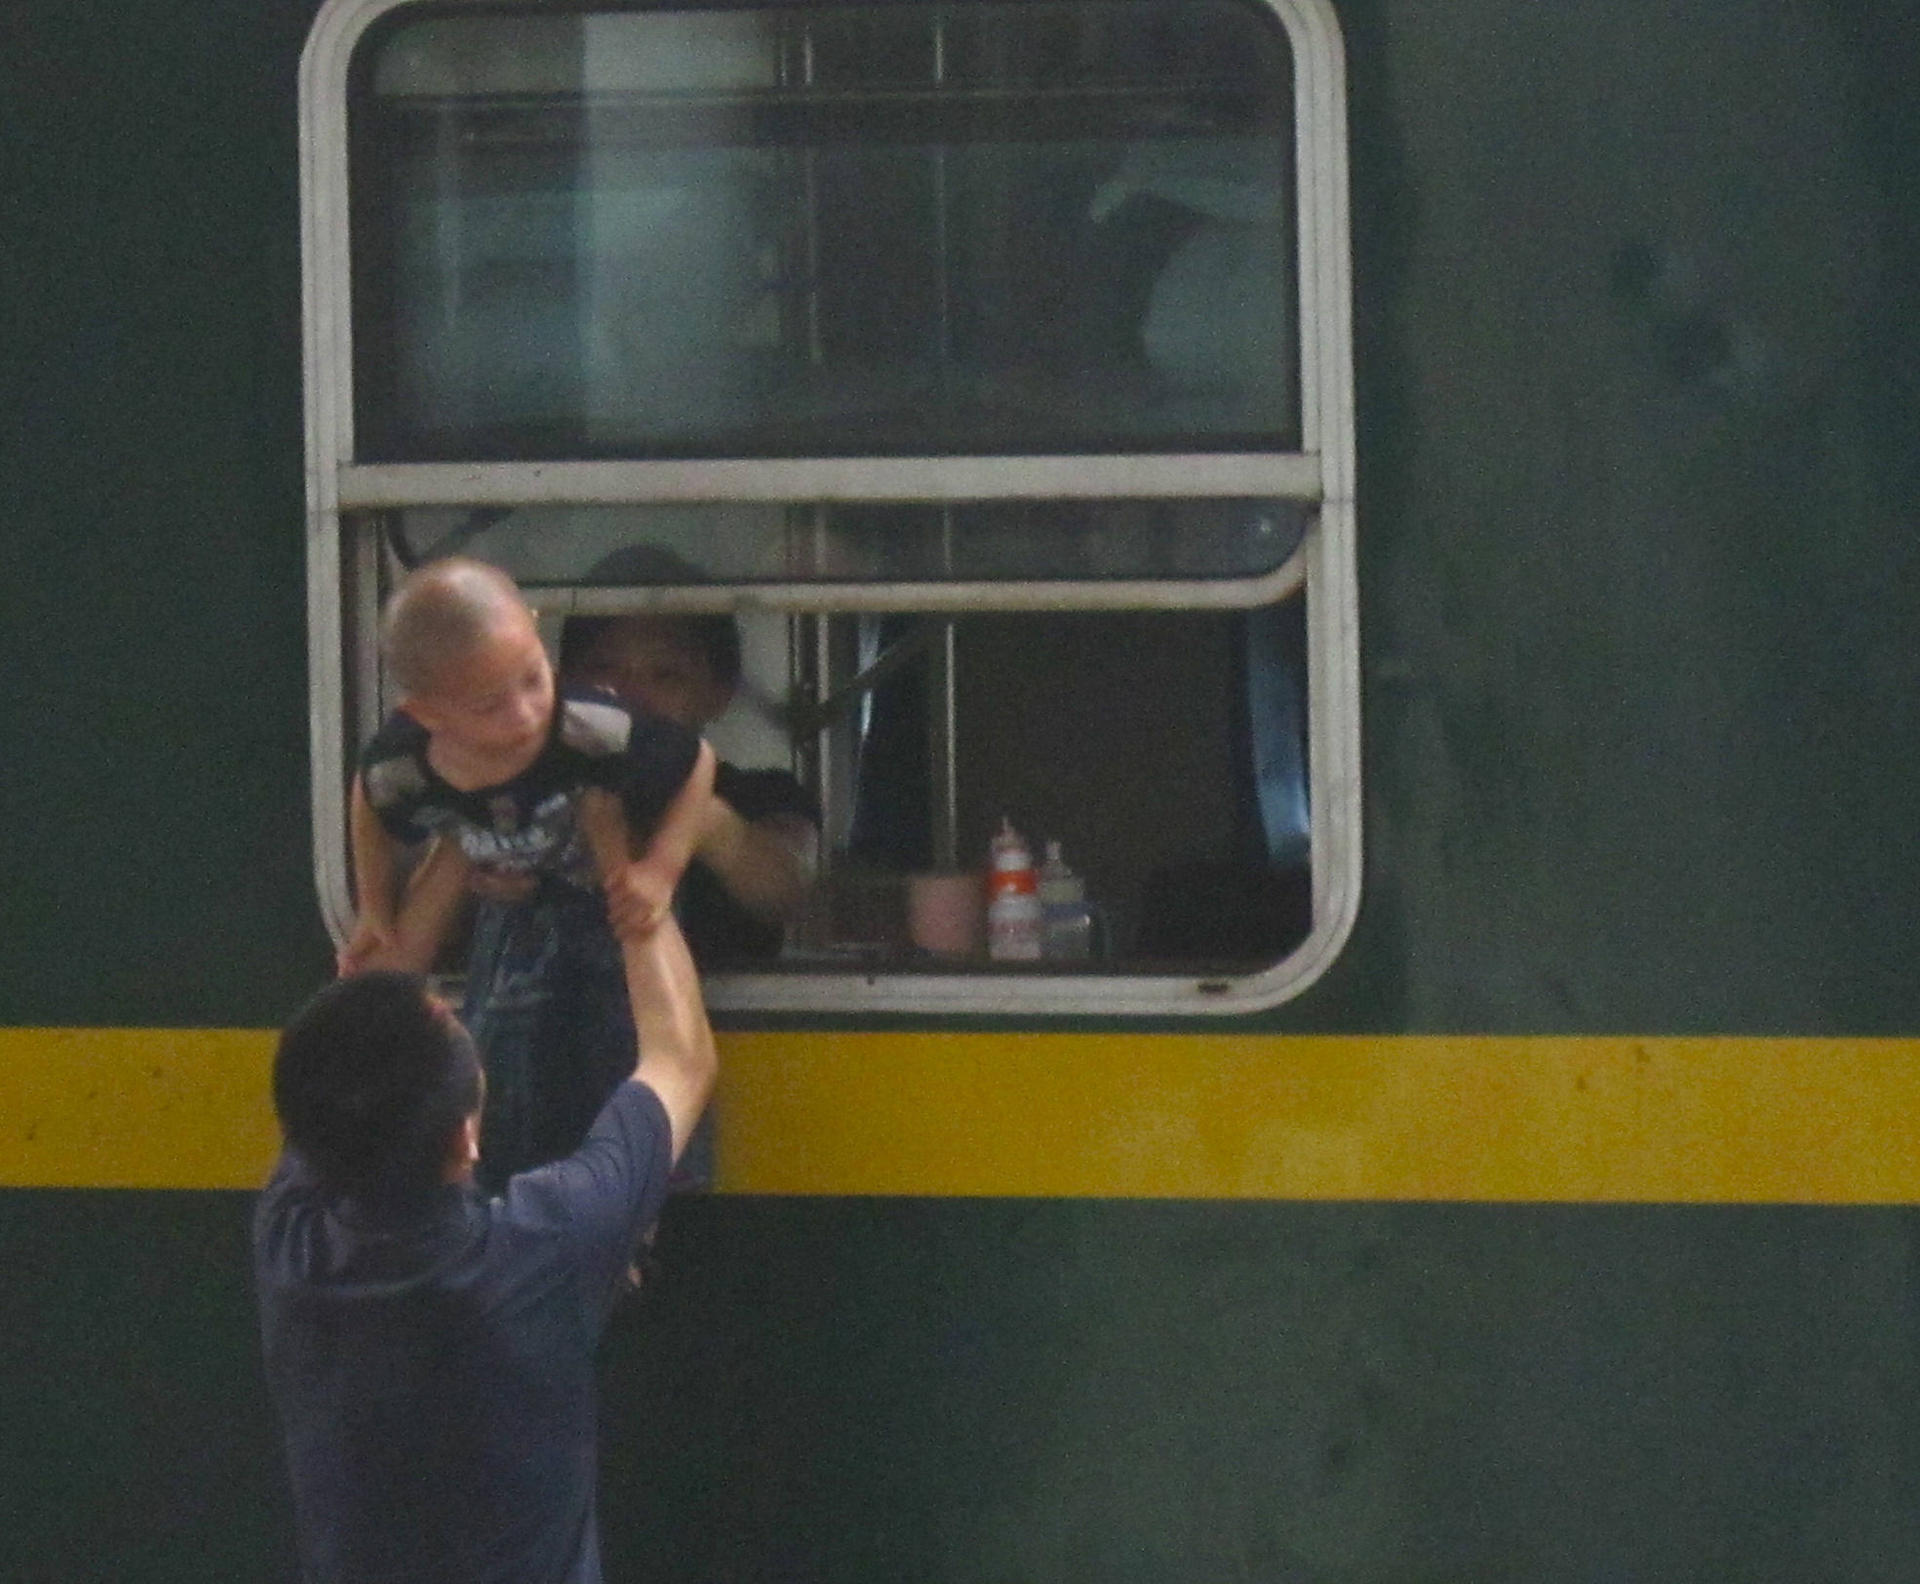 Fast track: travelling on China's overcrowded trains is no child's play. Photo: Cecilie Gamst Berg